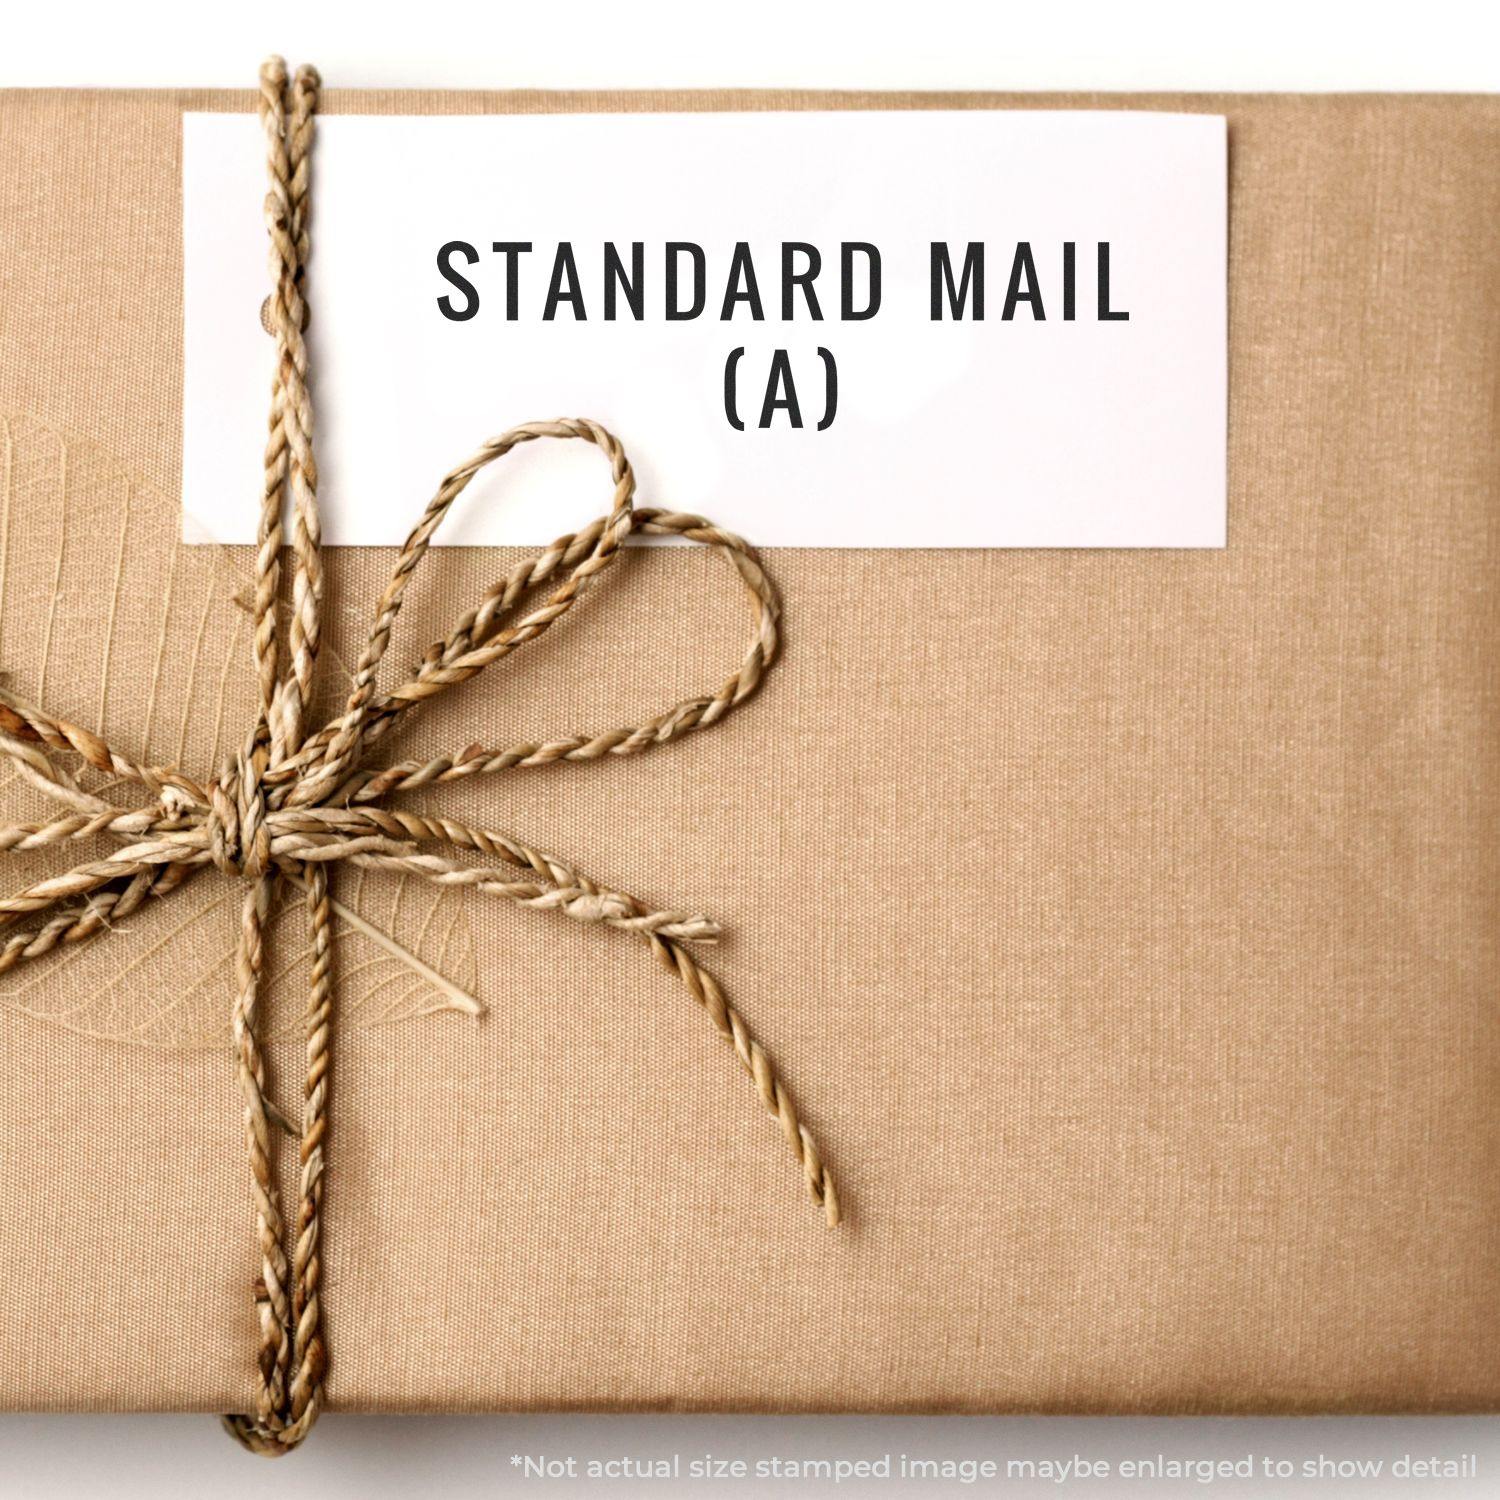 A self-inking stamp with a stamped image showing how the text "STANDARD MAIL (A)" in a large font is displayed by it after stamping.